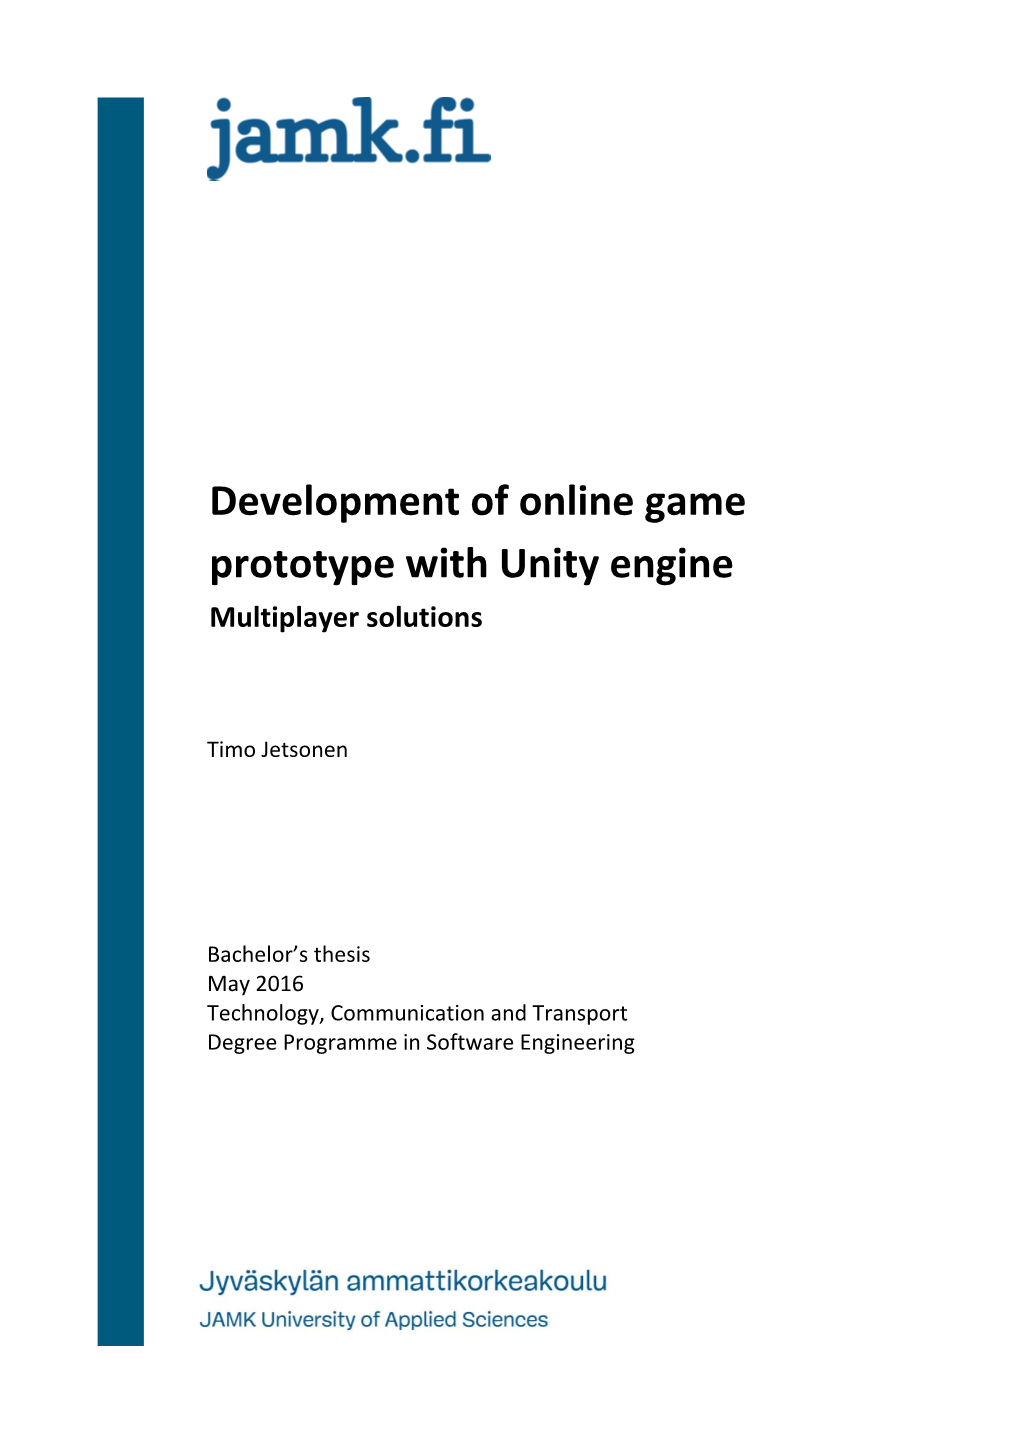 Development of Online Game Prototype with Unity Engine Multiplayer Solutions